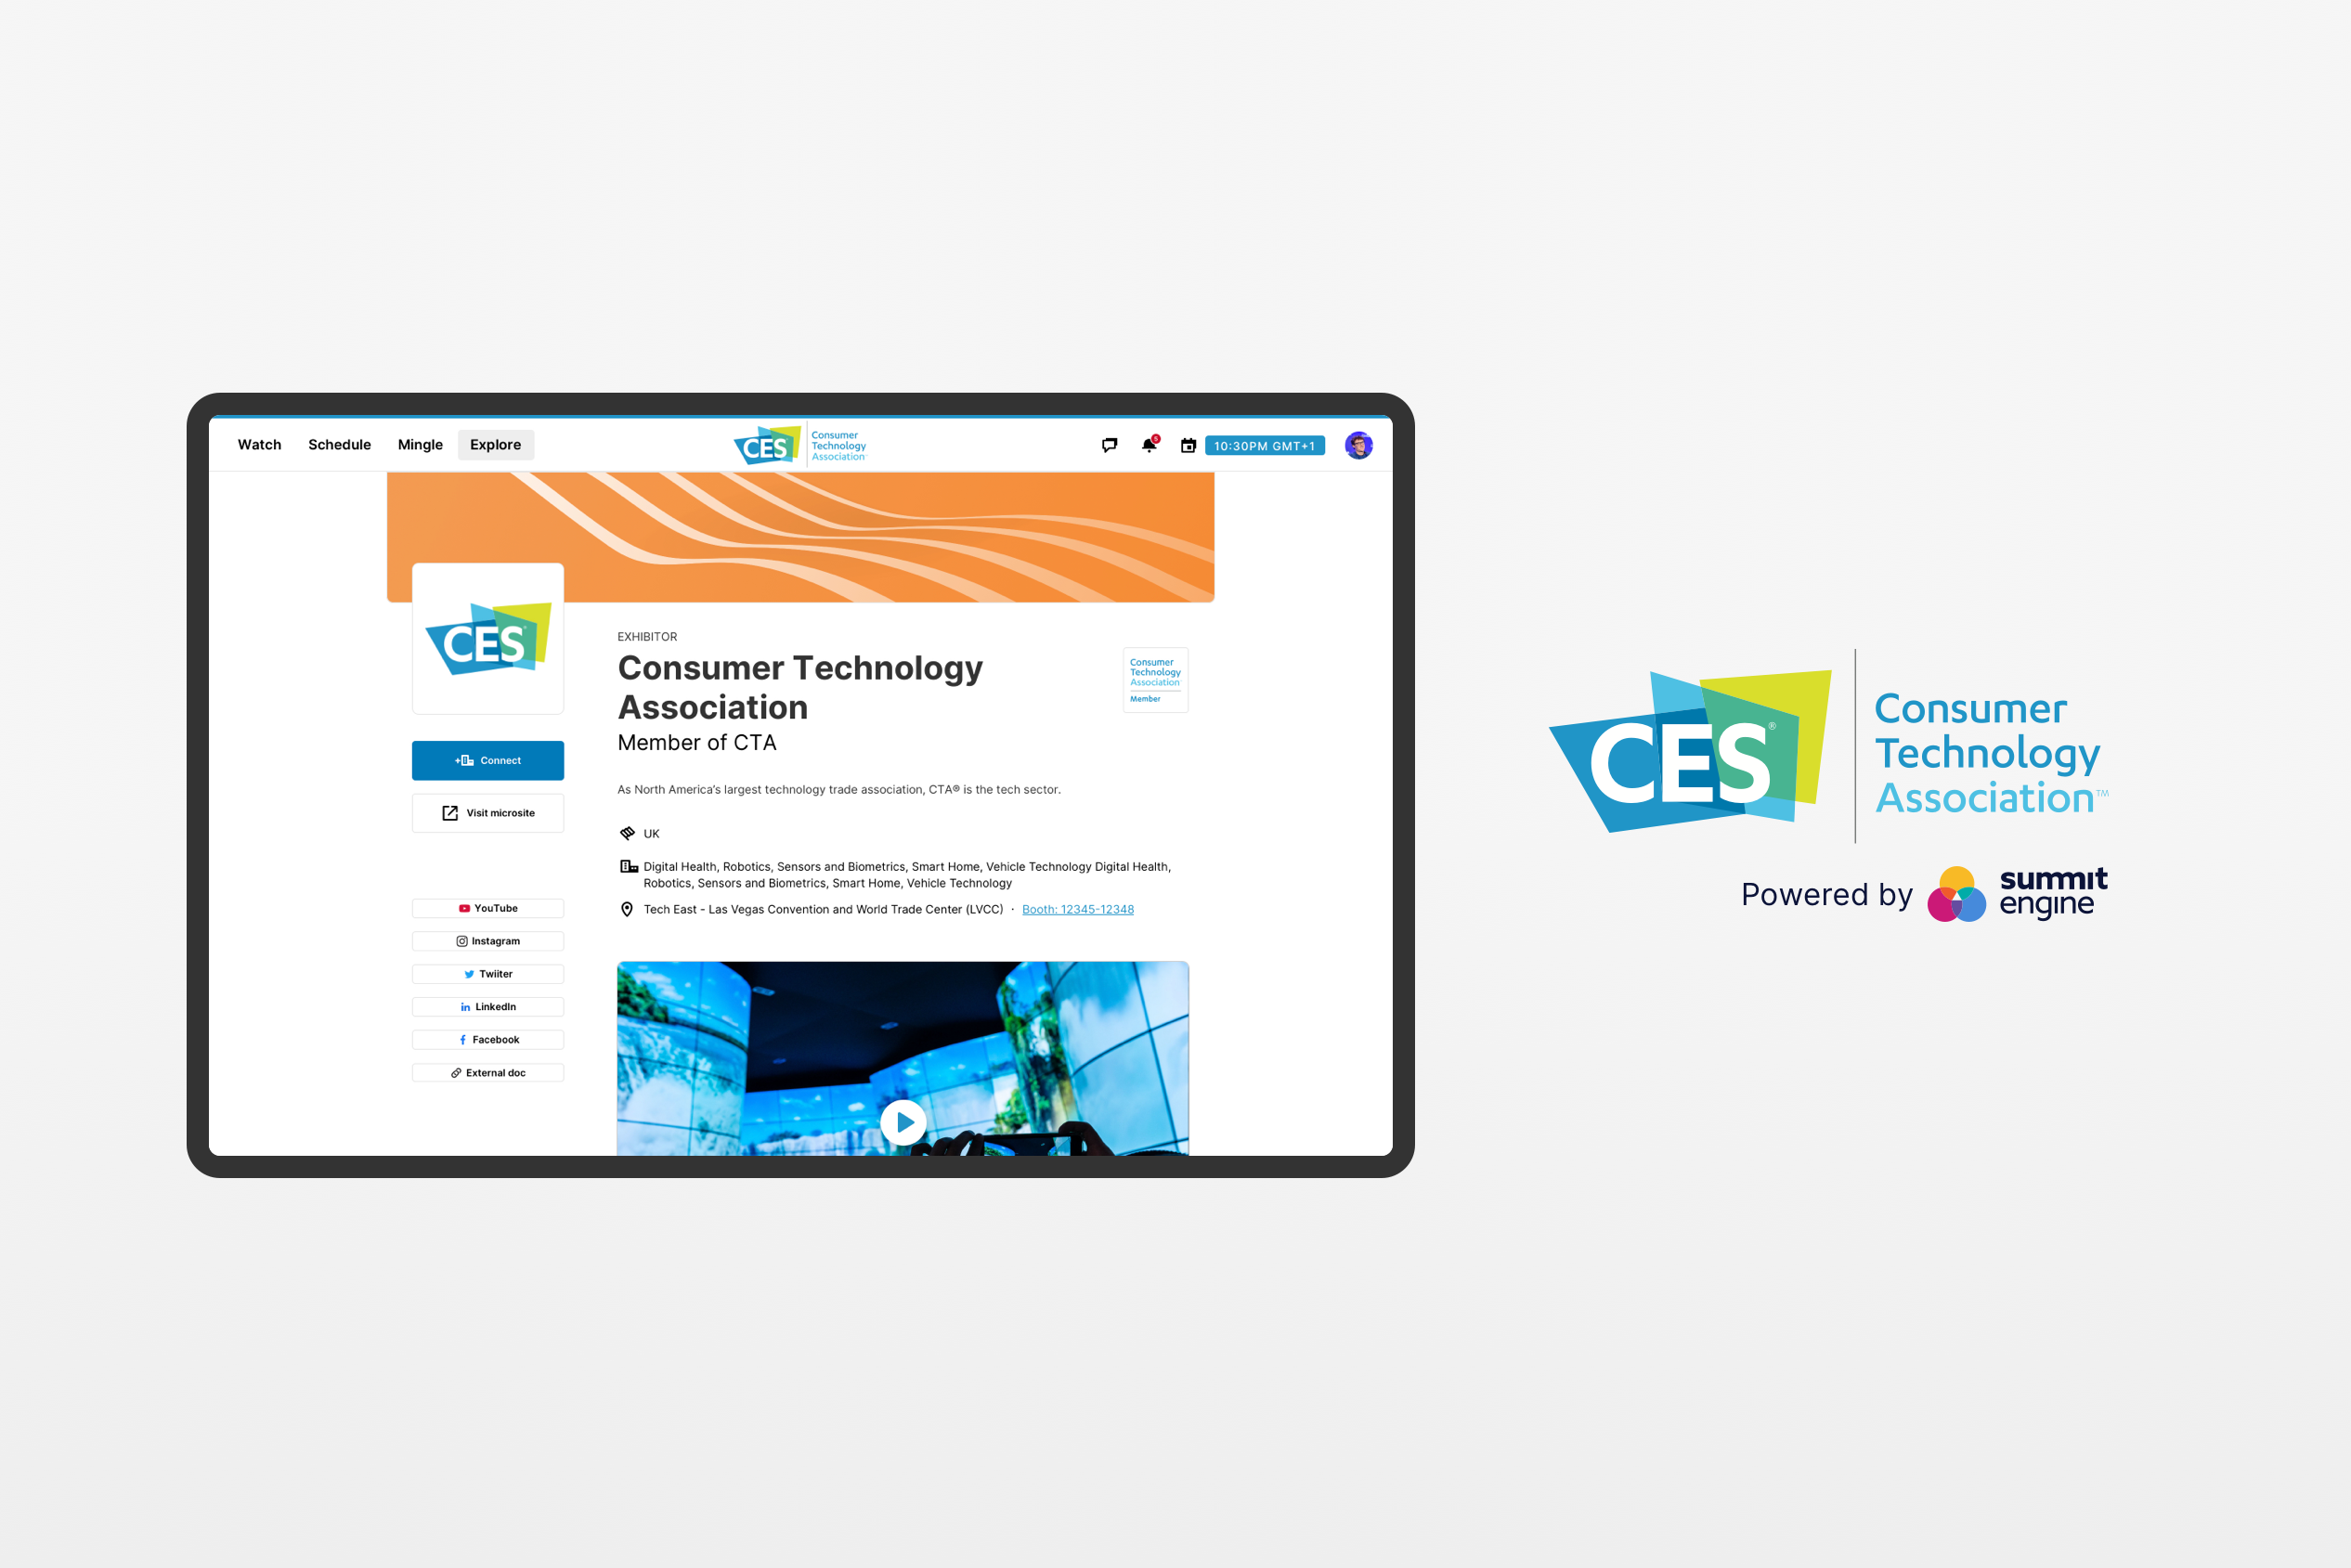 Web app with the blue and green branding of CES